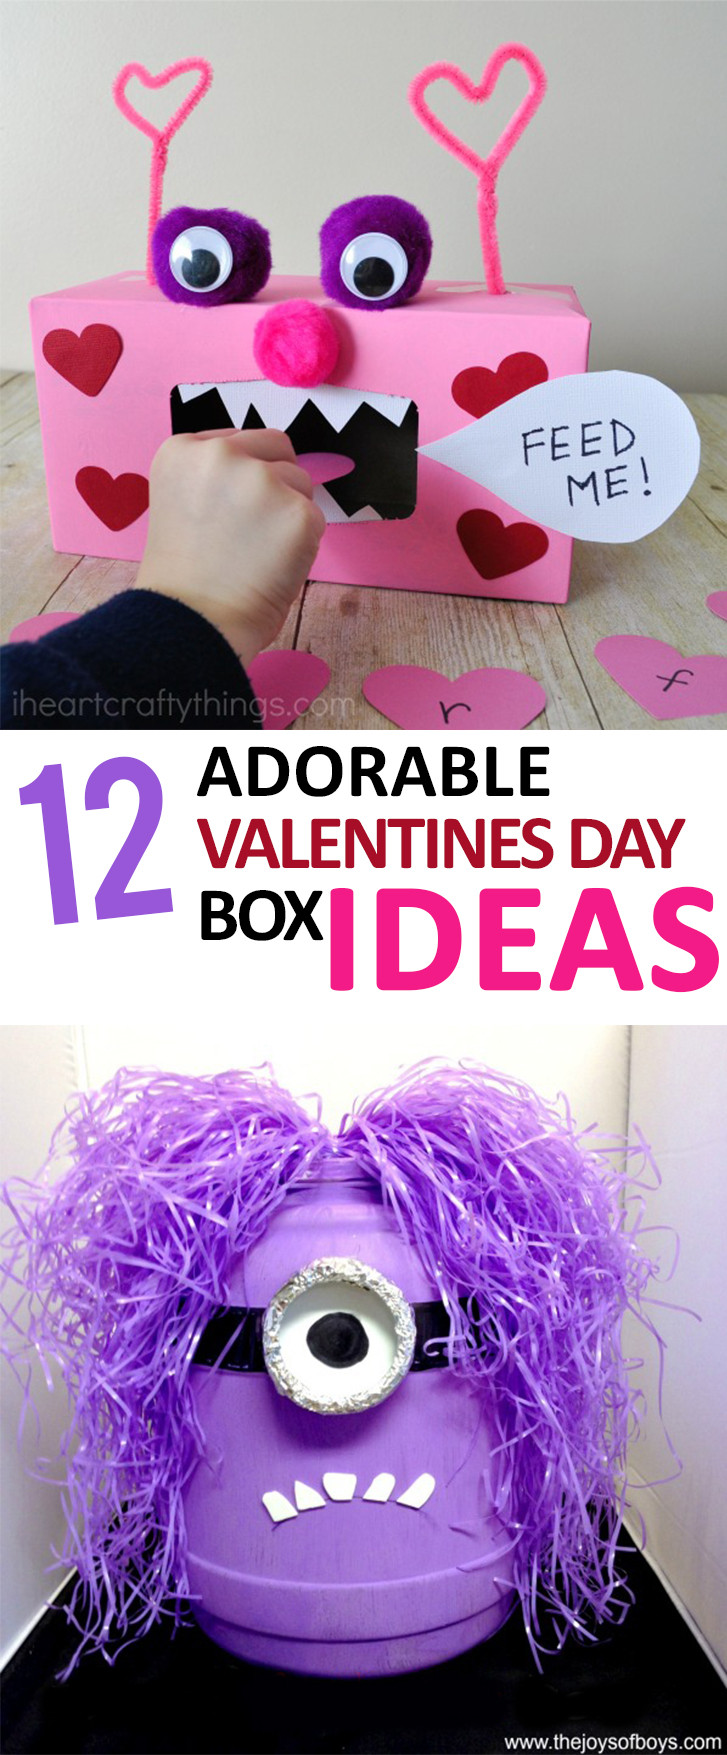 Valentines Day Boxes Ideas Awesome 12 Adorable Valentines Day Box Ideas – Sunlit Spaces